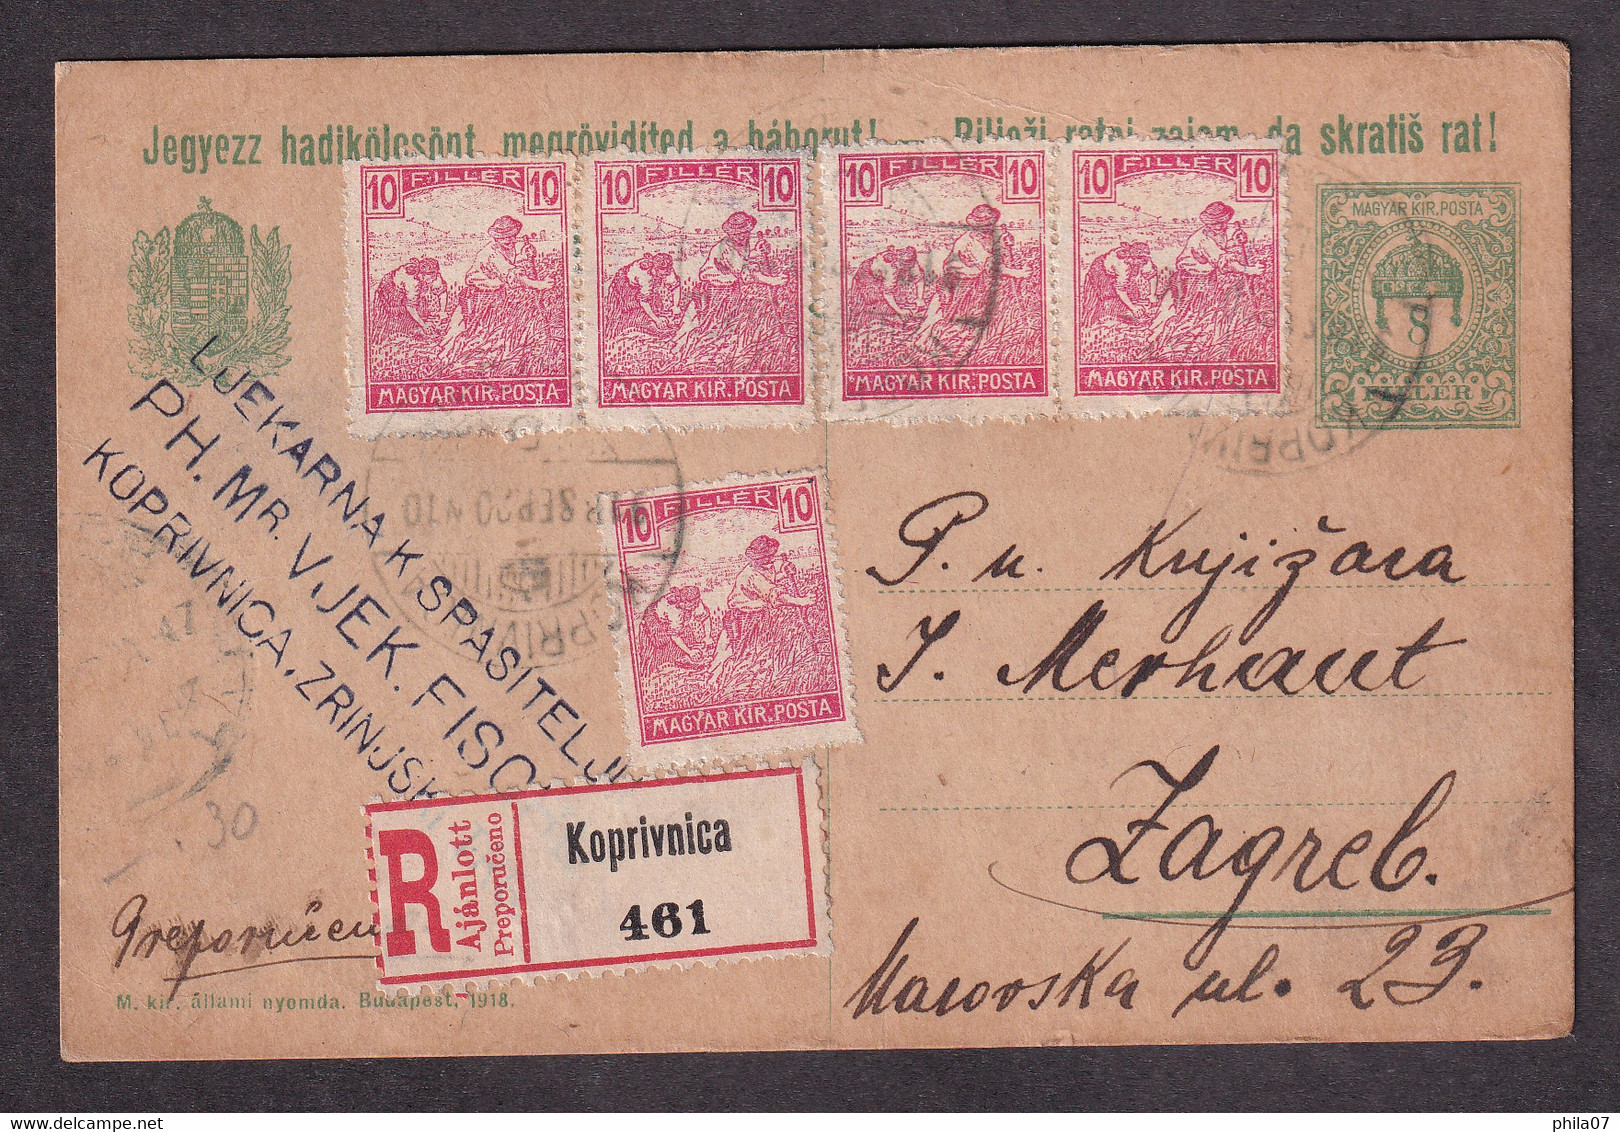 Croatia Until 1918 - Bilingual Stationery Upfranked And Sent By Registered Mail From Pharmacy In Koprivnica To / 2 Scans - Unclassified